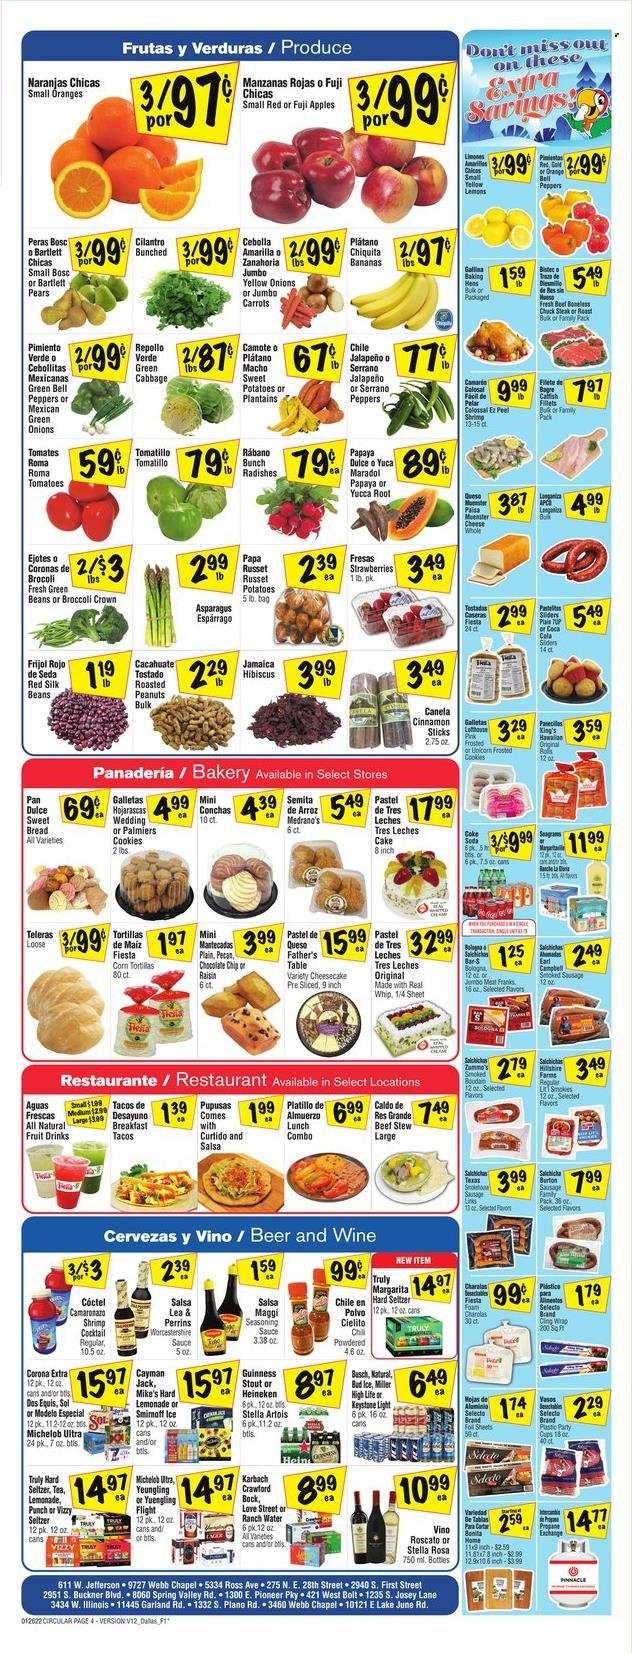 thumbnail - Fiesta Mart Flyer - 01/26/2022 - 02/01/2022 - Sales products - bread, corn tortillas, tortillas, cake, tostadas, tacos, Father's Table, cheesecake, sweet bread, asparagus, beans, bell peppers, broccoli, cabbage, carrots, green beans, radishes, russet potatoes, sweet potato, tomatillo, tomatoes, potatoes, peppers, jalapeño, green onion, apples, bananas, papaya, oranges, Fuji apple, shrimps, sauce, cheese, Silk, cookies, Maggi, cilantro, spice, cinnamon, worcestershire sauce, salsa, roasted peanuts, peanuts, Coca-Cola, lemonade, soda, tea, punch, Hard Seltzer, TRULY, beer, Busch, Corona Extra, Heineken, Guinness, Miller, Sol, beef meat, steak, chuck steak, party cups, Stella Artois, plantains, Dos Equis, Yuengling, Michelob, lemons. Page 4.